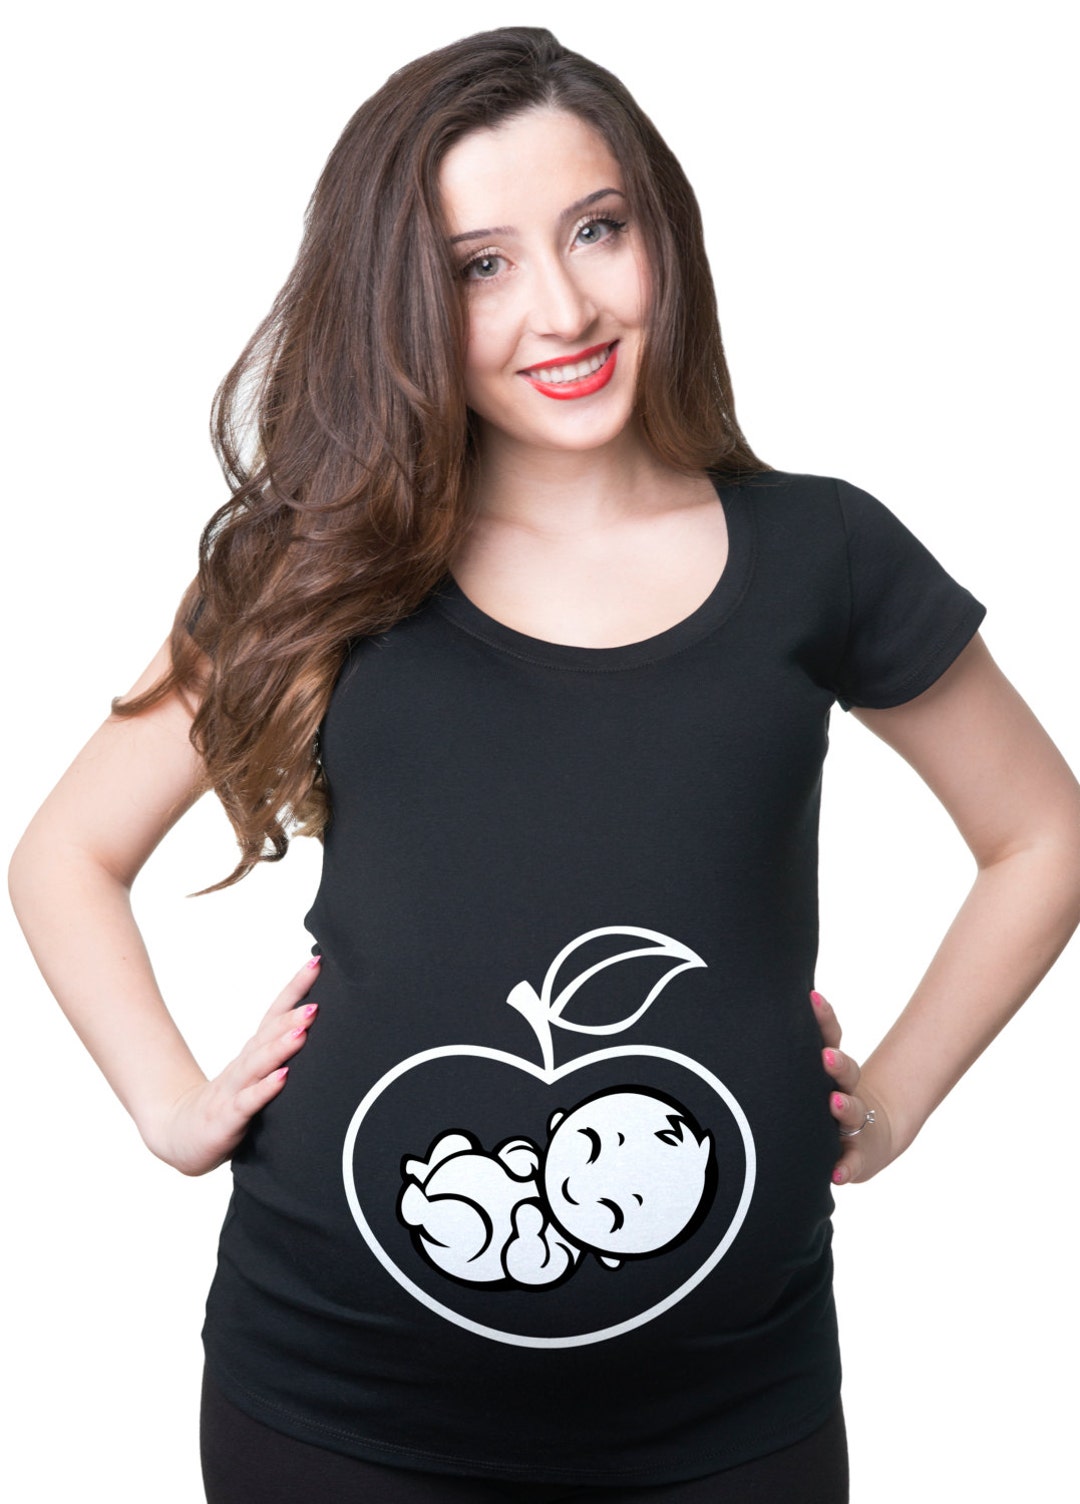 Pregnancy T-shirt Funny Maternity Top Baby in Apple Funny Baby 